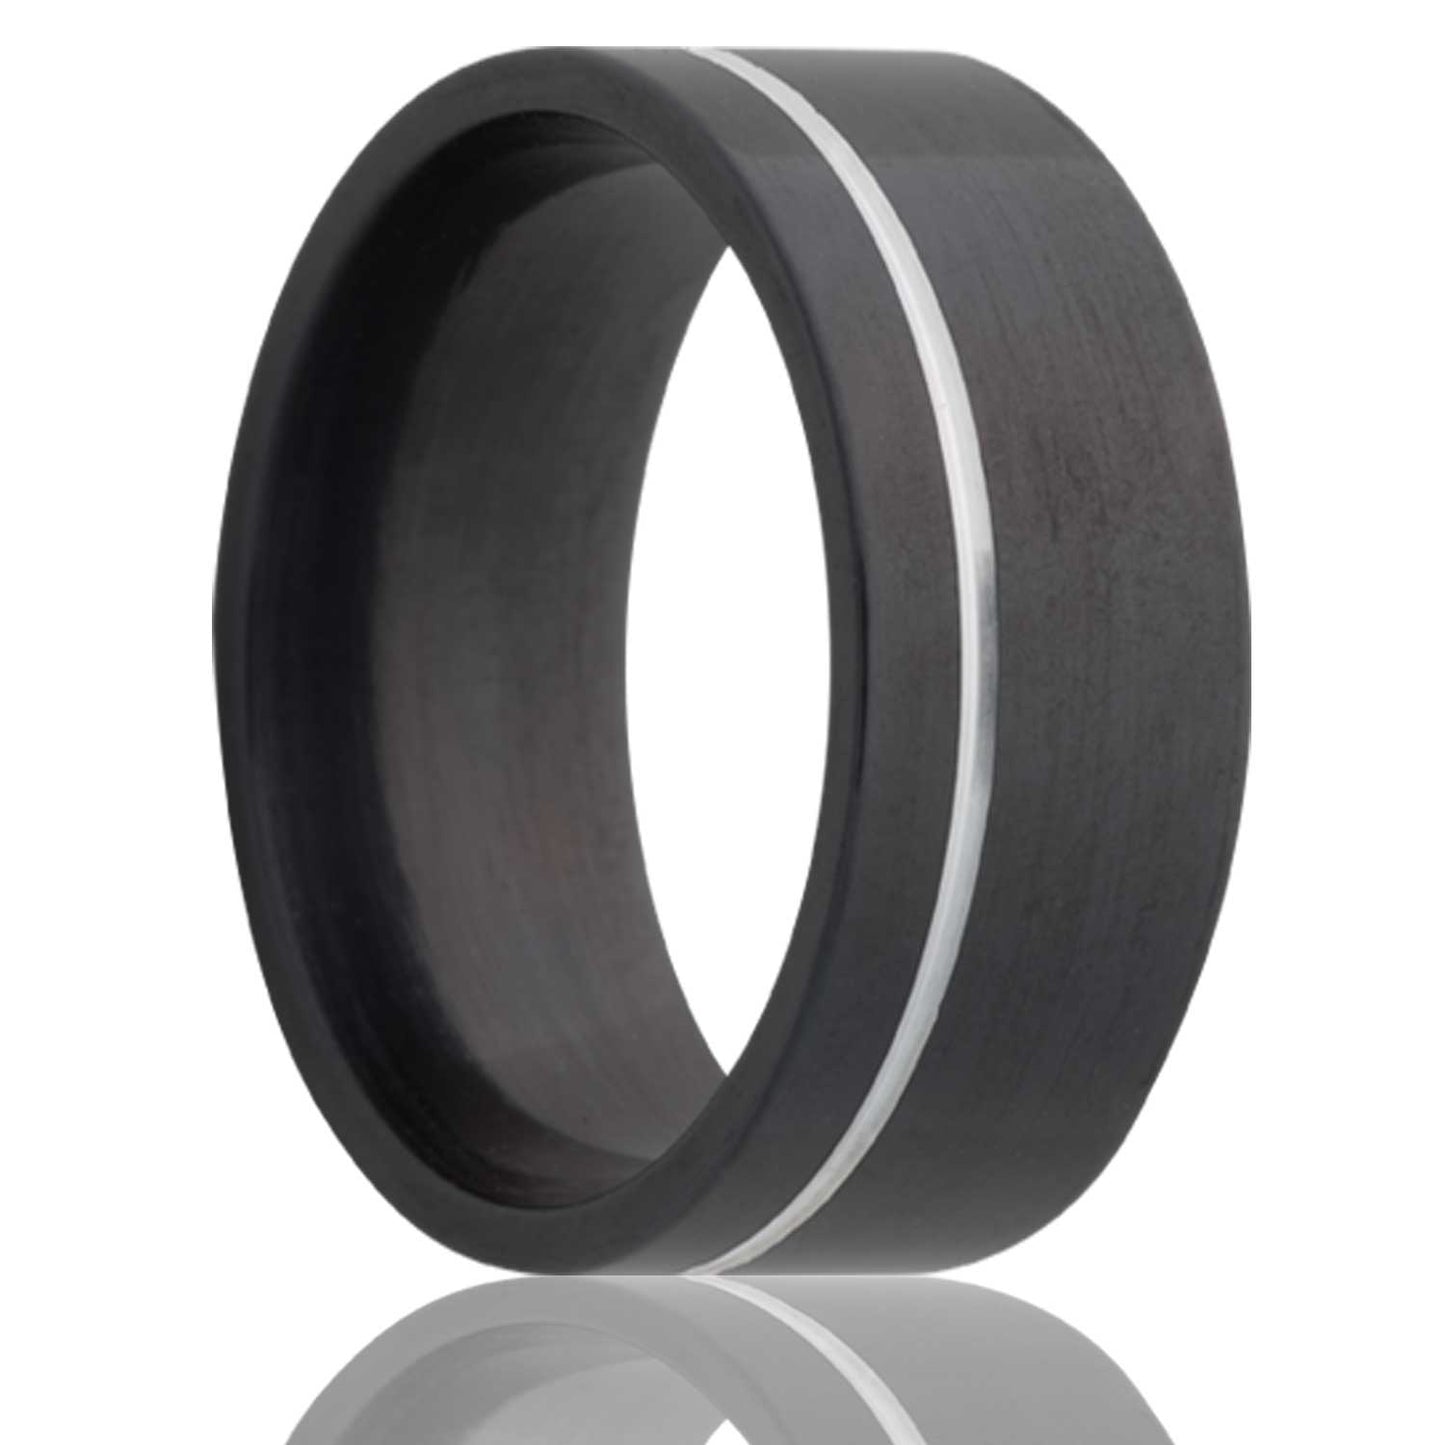 A asymmetrical grooved zirconium wedding band displayed on a neutral white background.